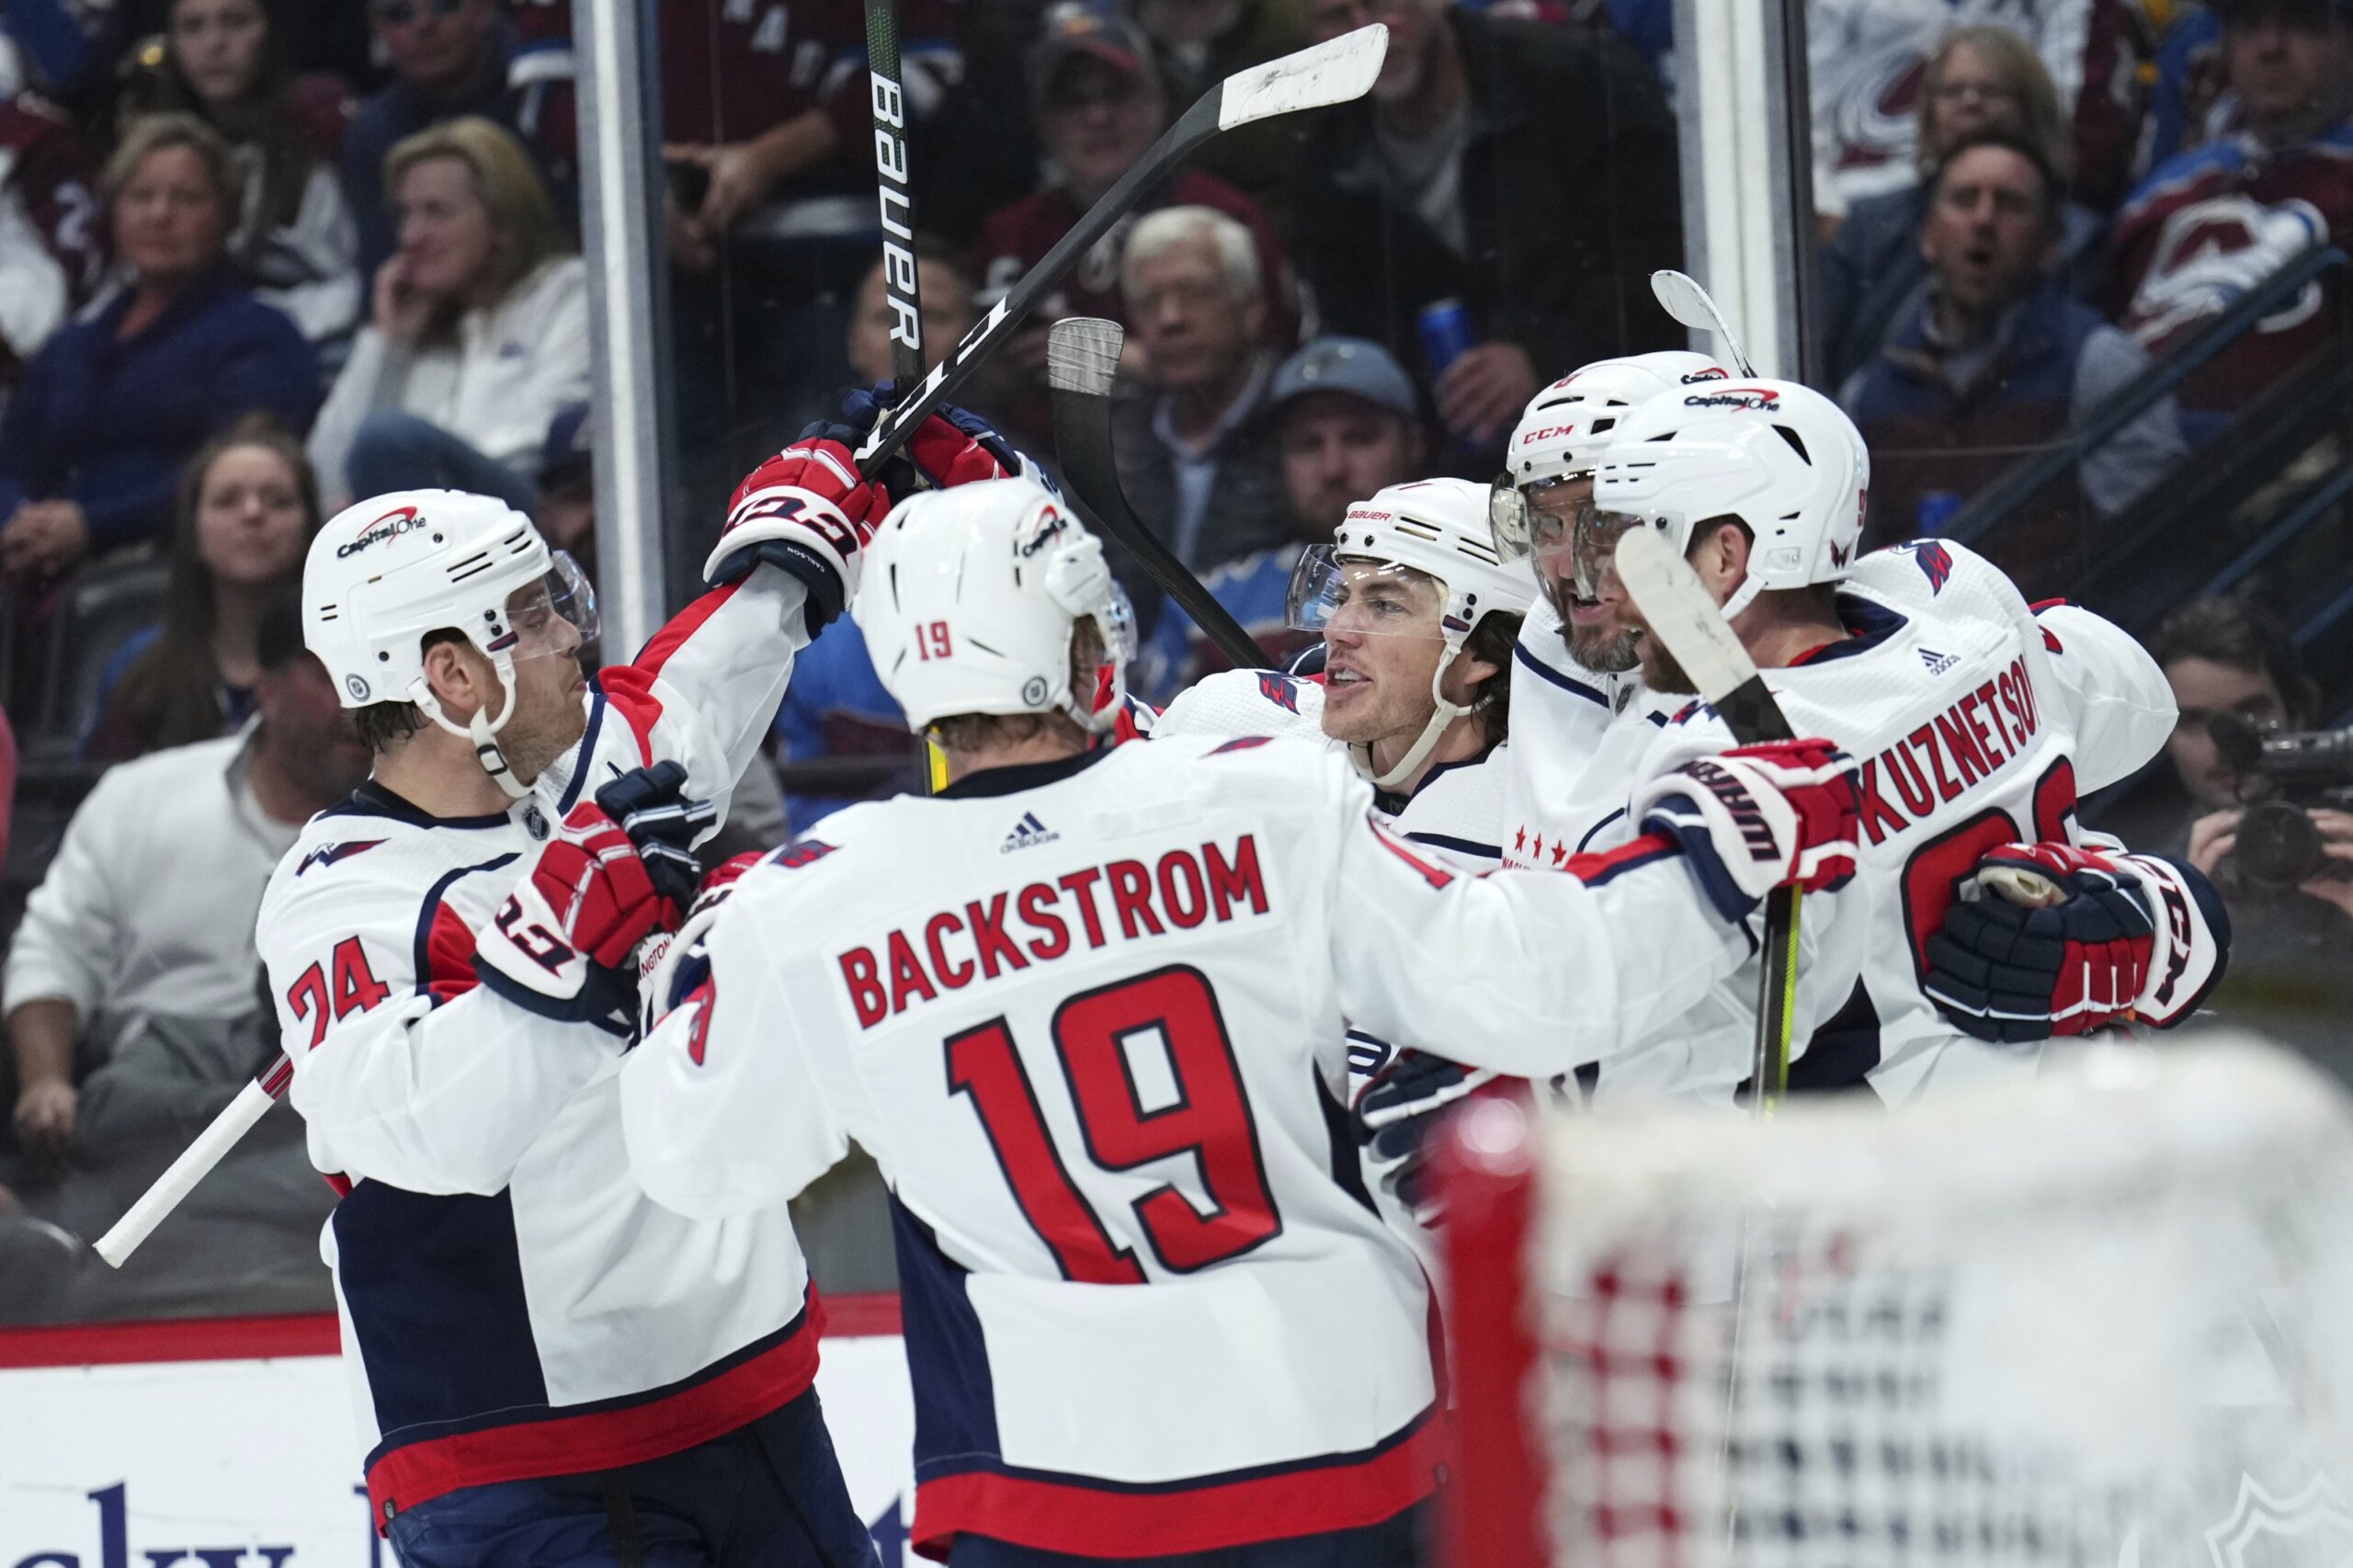 Capitals win first ever Stanley Cup with comeback win